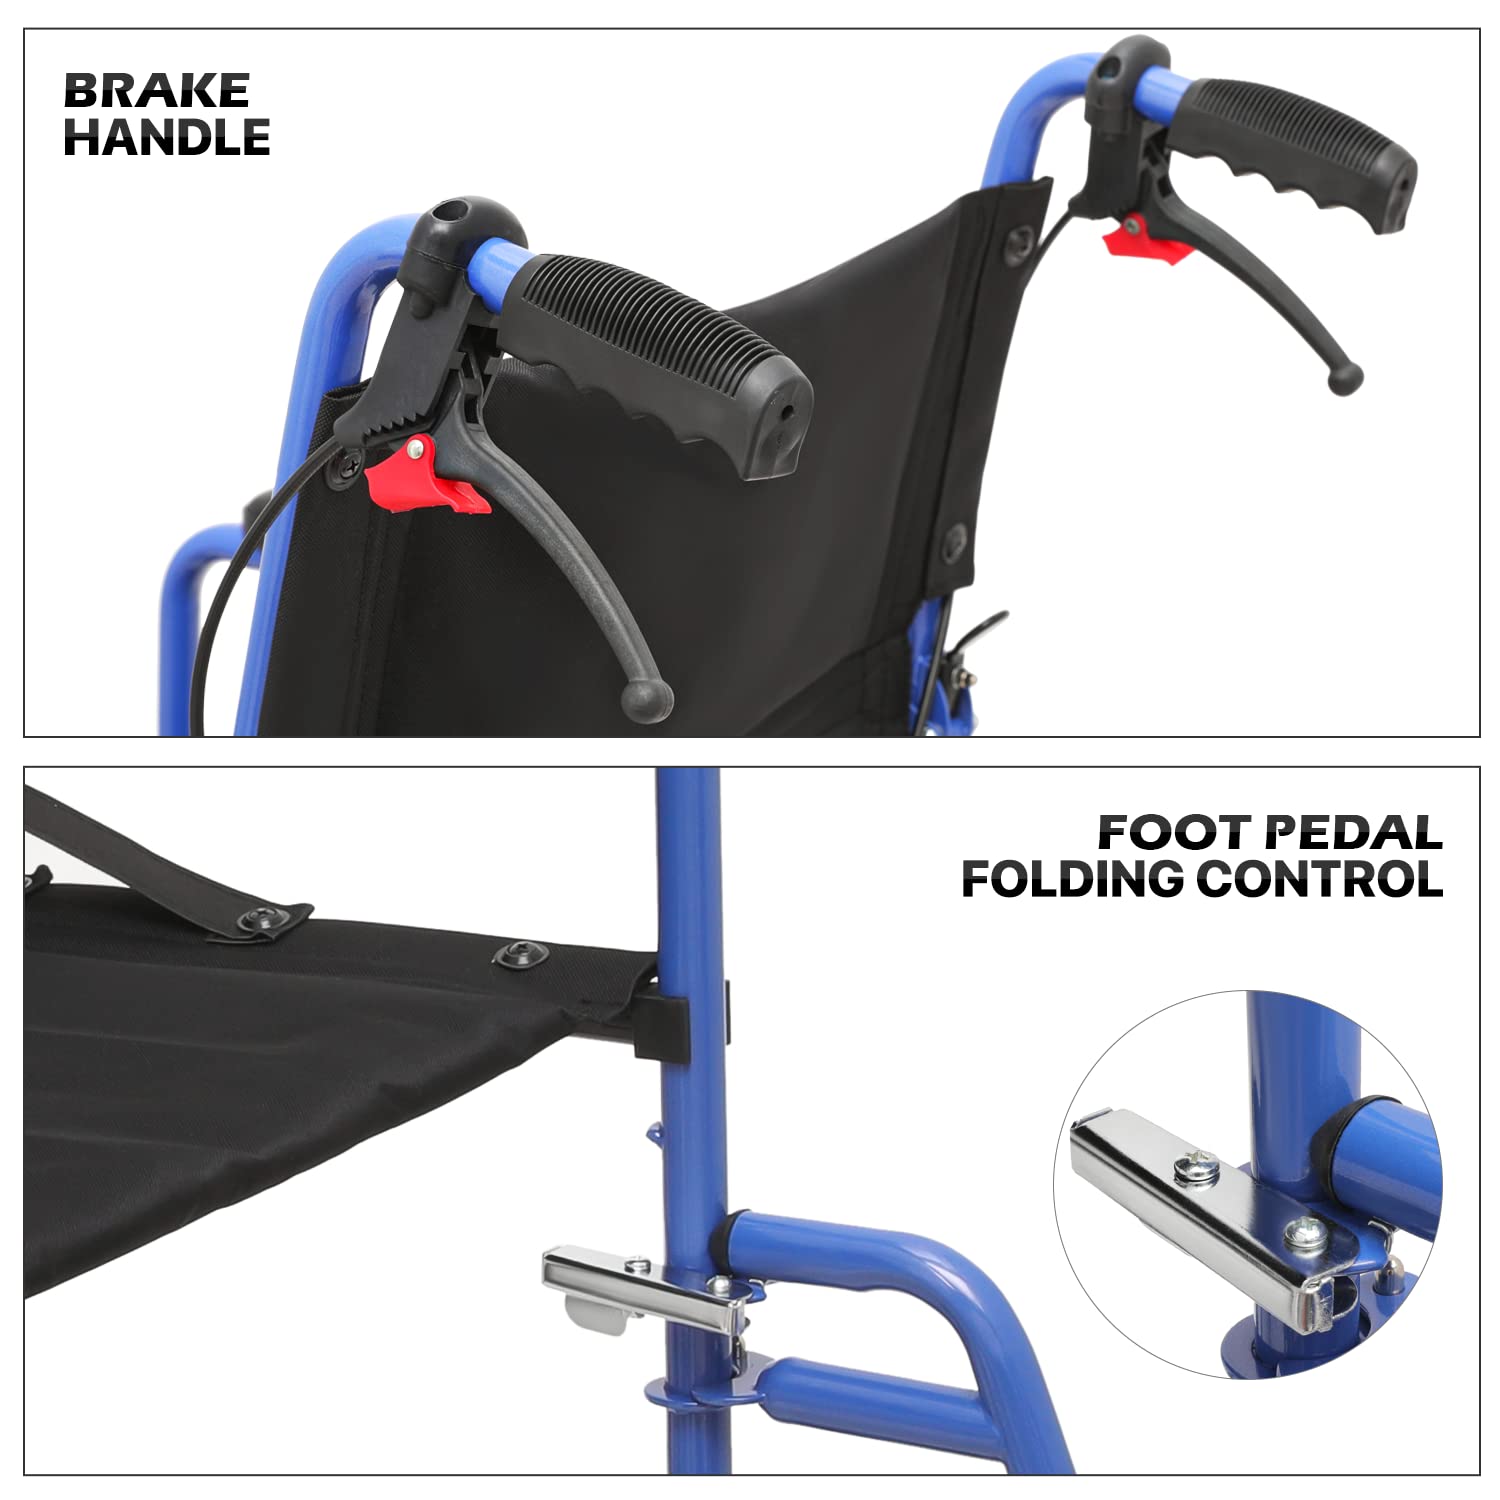 MoNiBloom Lightweight Wheelchair 16 inch Seat Ultralight Transport Chair with Locking Hand Brakes and Swing-Away Foot Rests Foldable Wheel Chair for Adults, 250 lbs Capacity, Blue